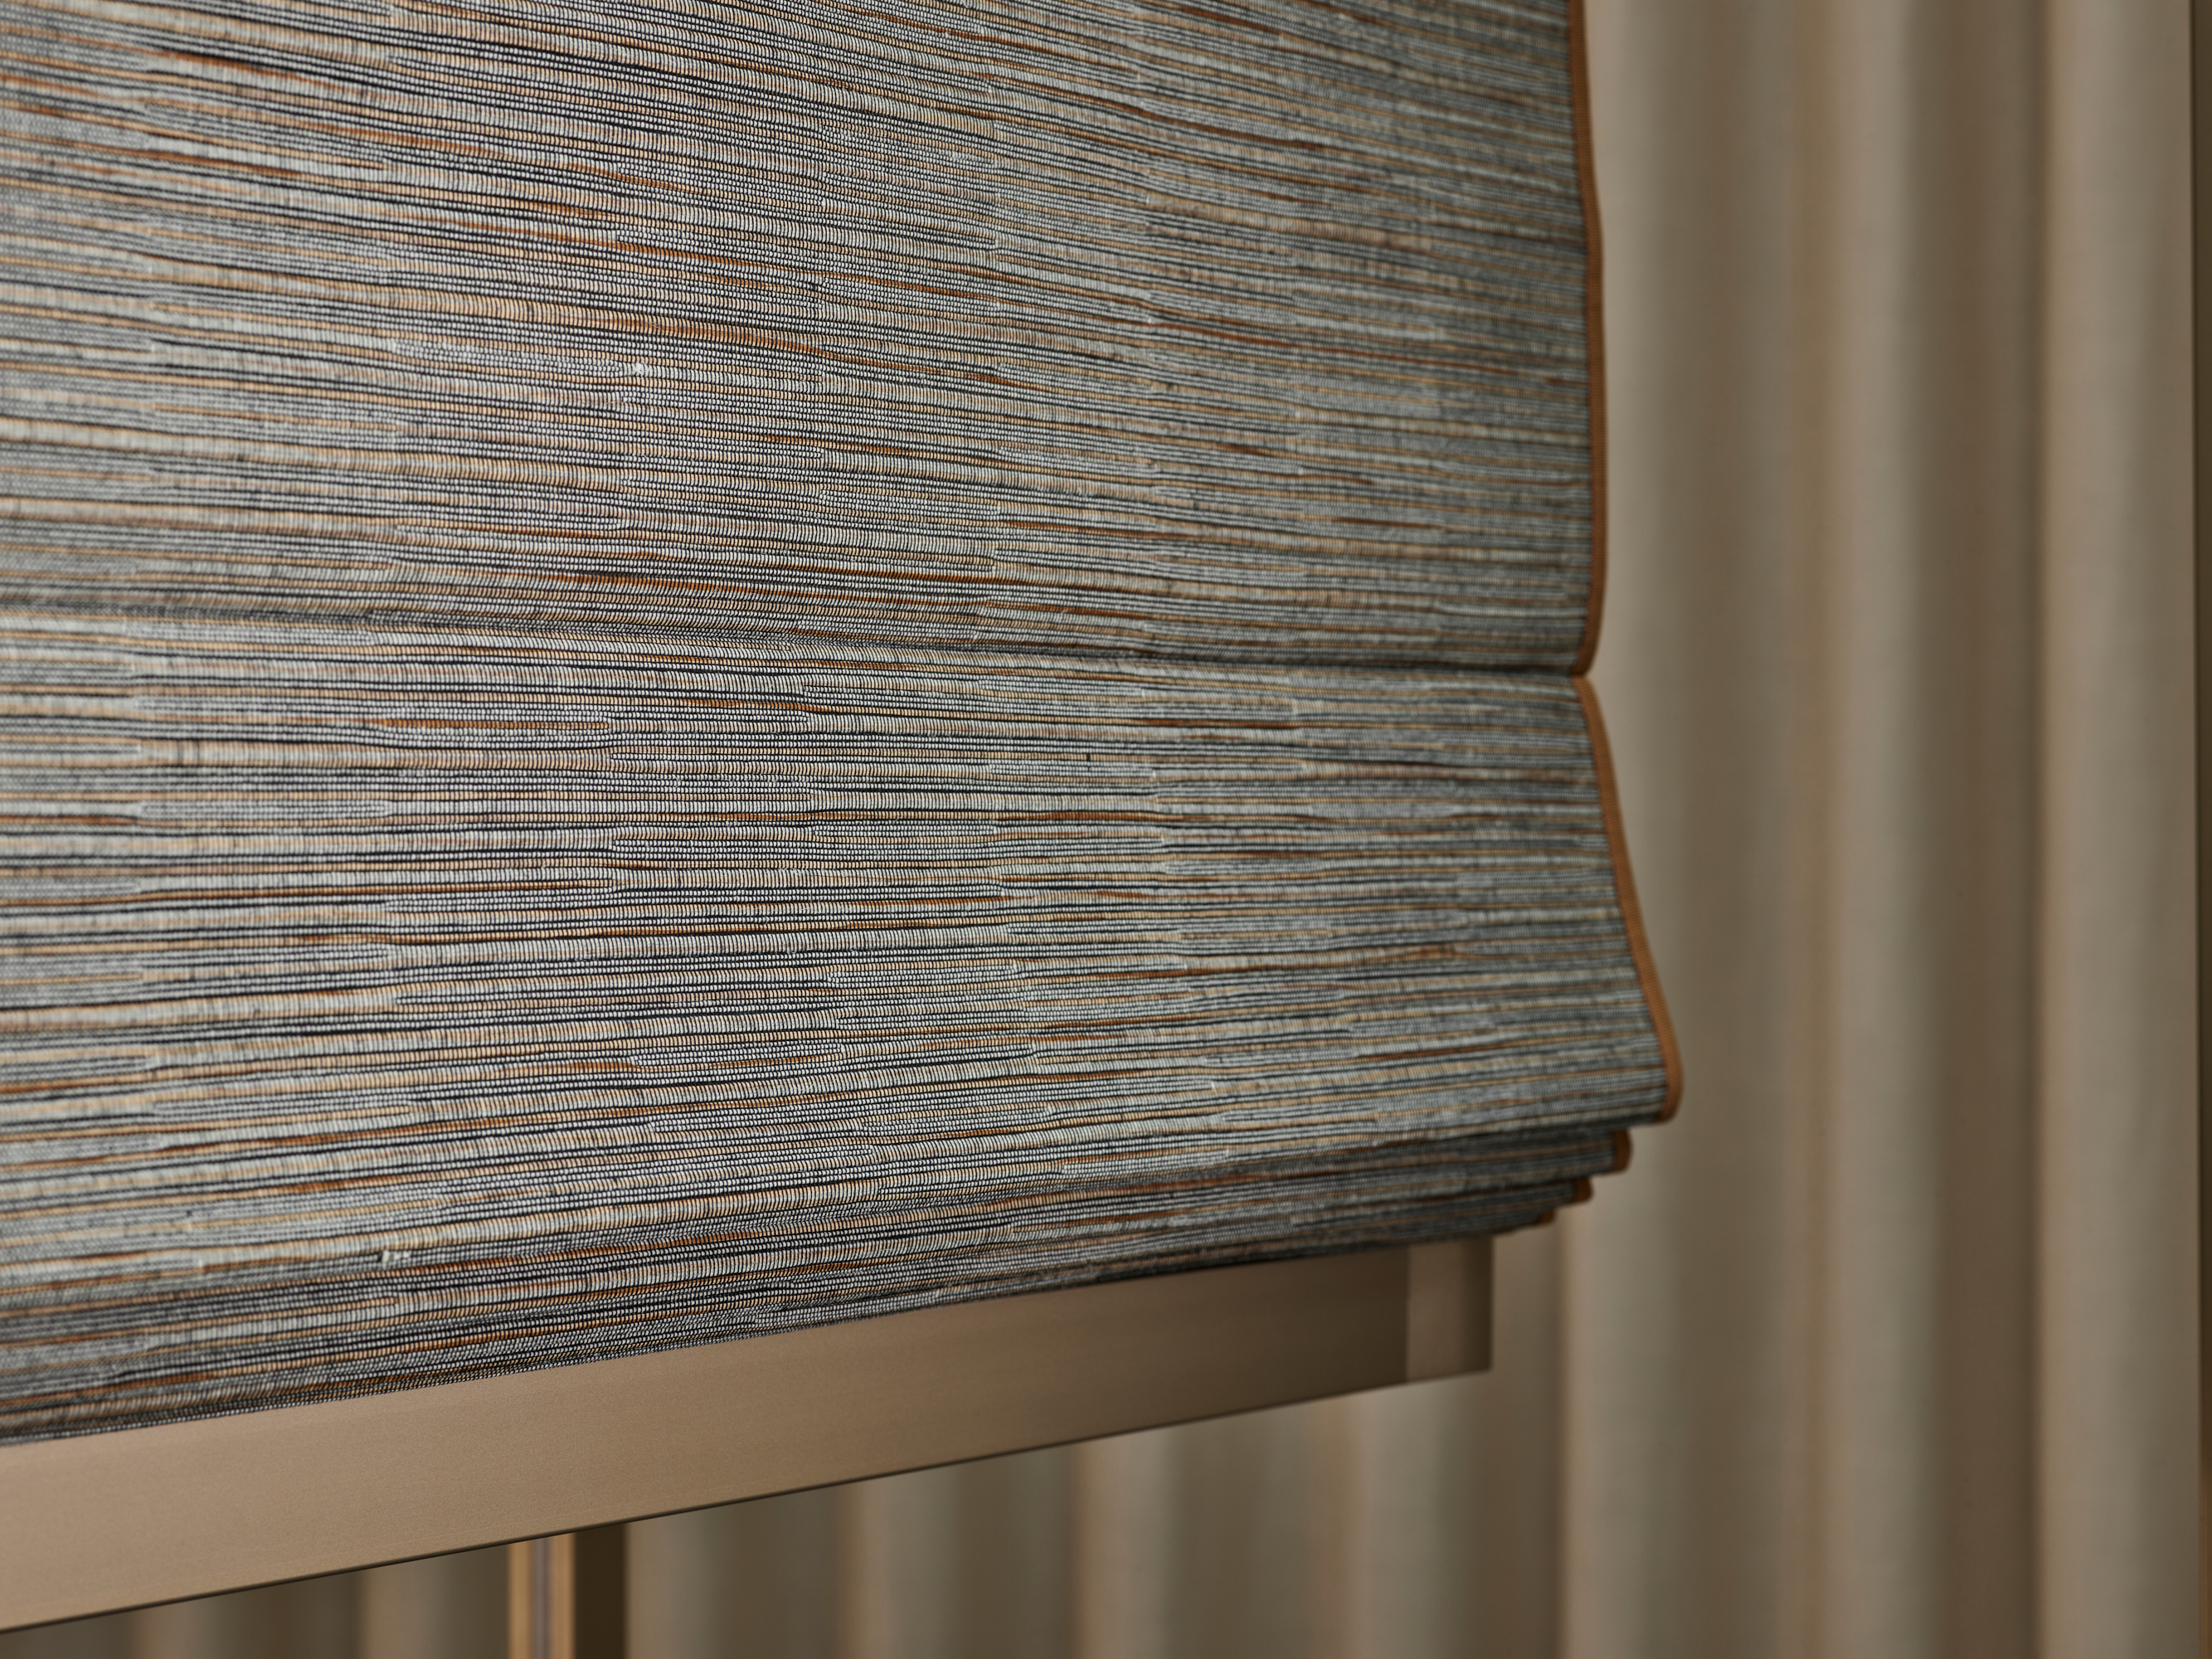 Inside Blinds - Craft and nature - window decoration - window coverings - natural materials - Angkor 20 - satin cumin - croco bronze night